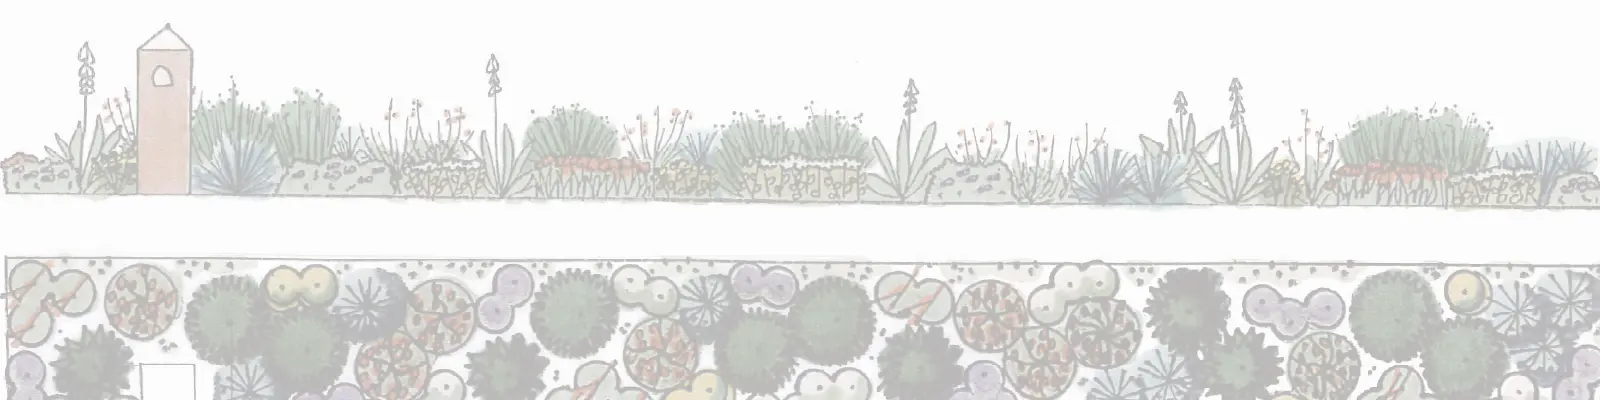 Image showing drawings or plants in an arrange landscapse from an overhead view and a side view.